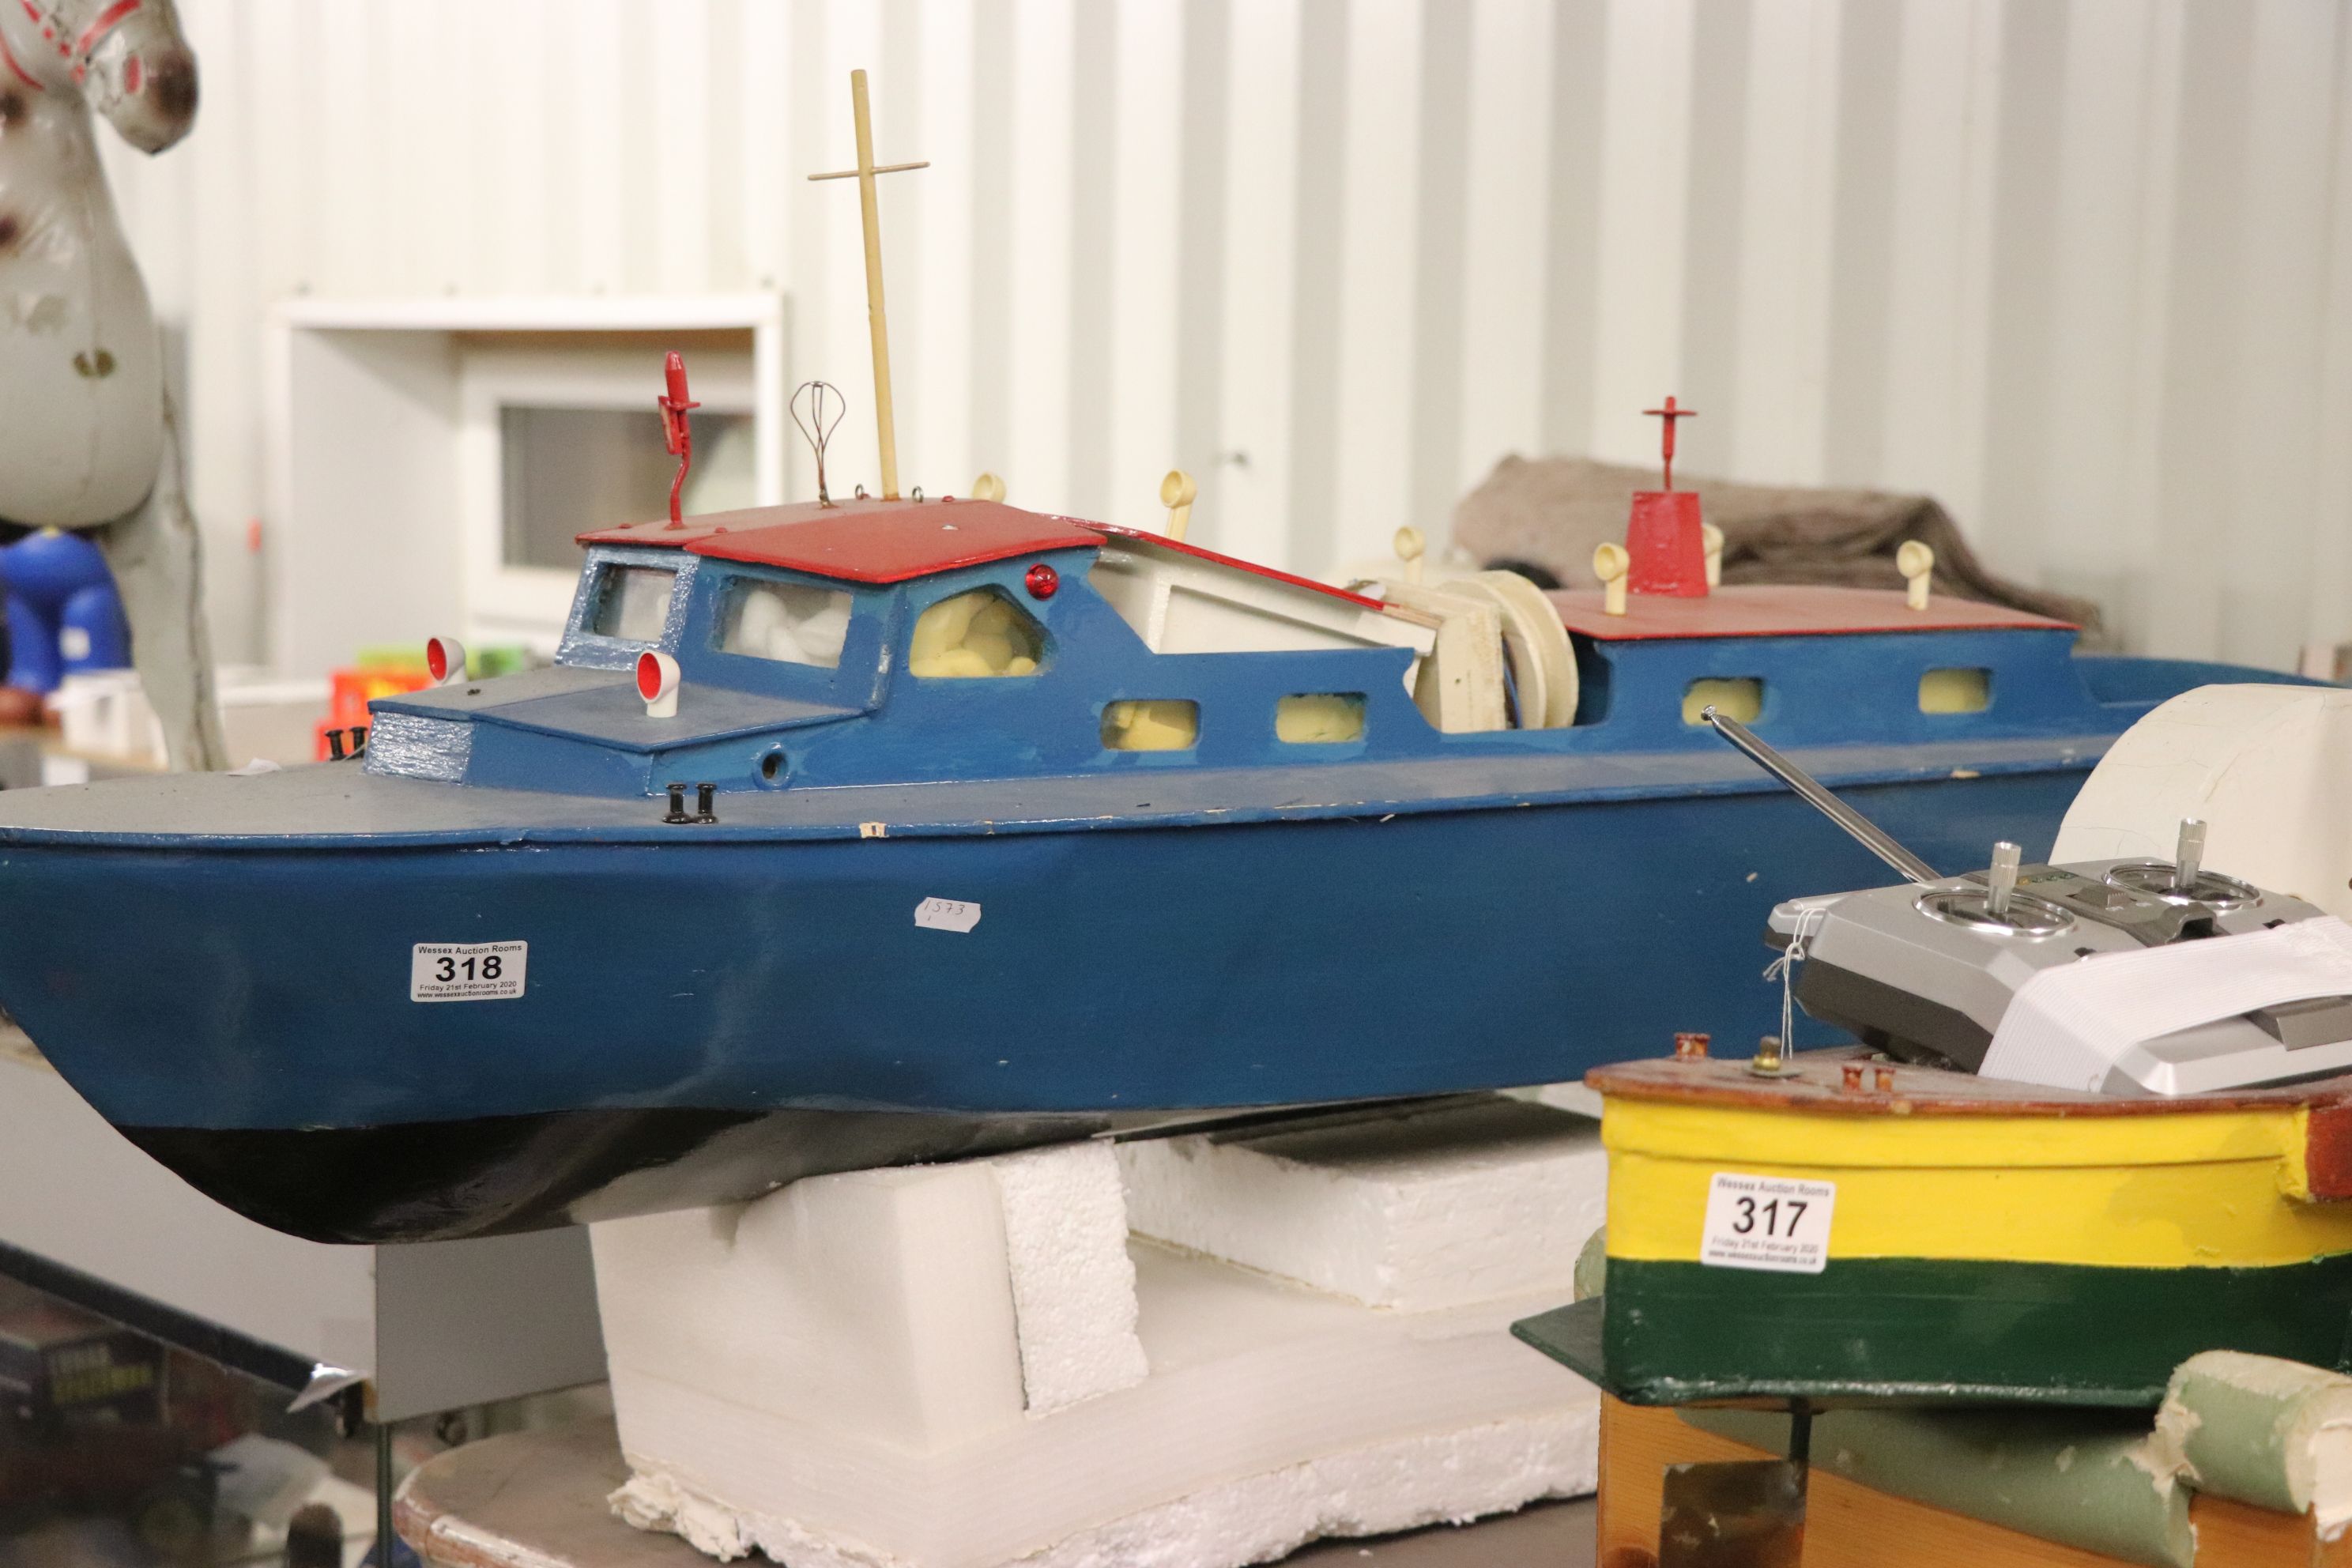 Large wooden radio controlled boat painted blue and red, approx. 45" in length